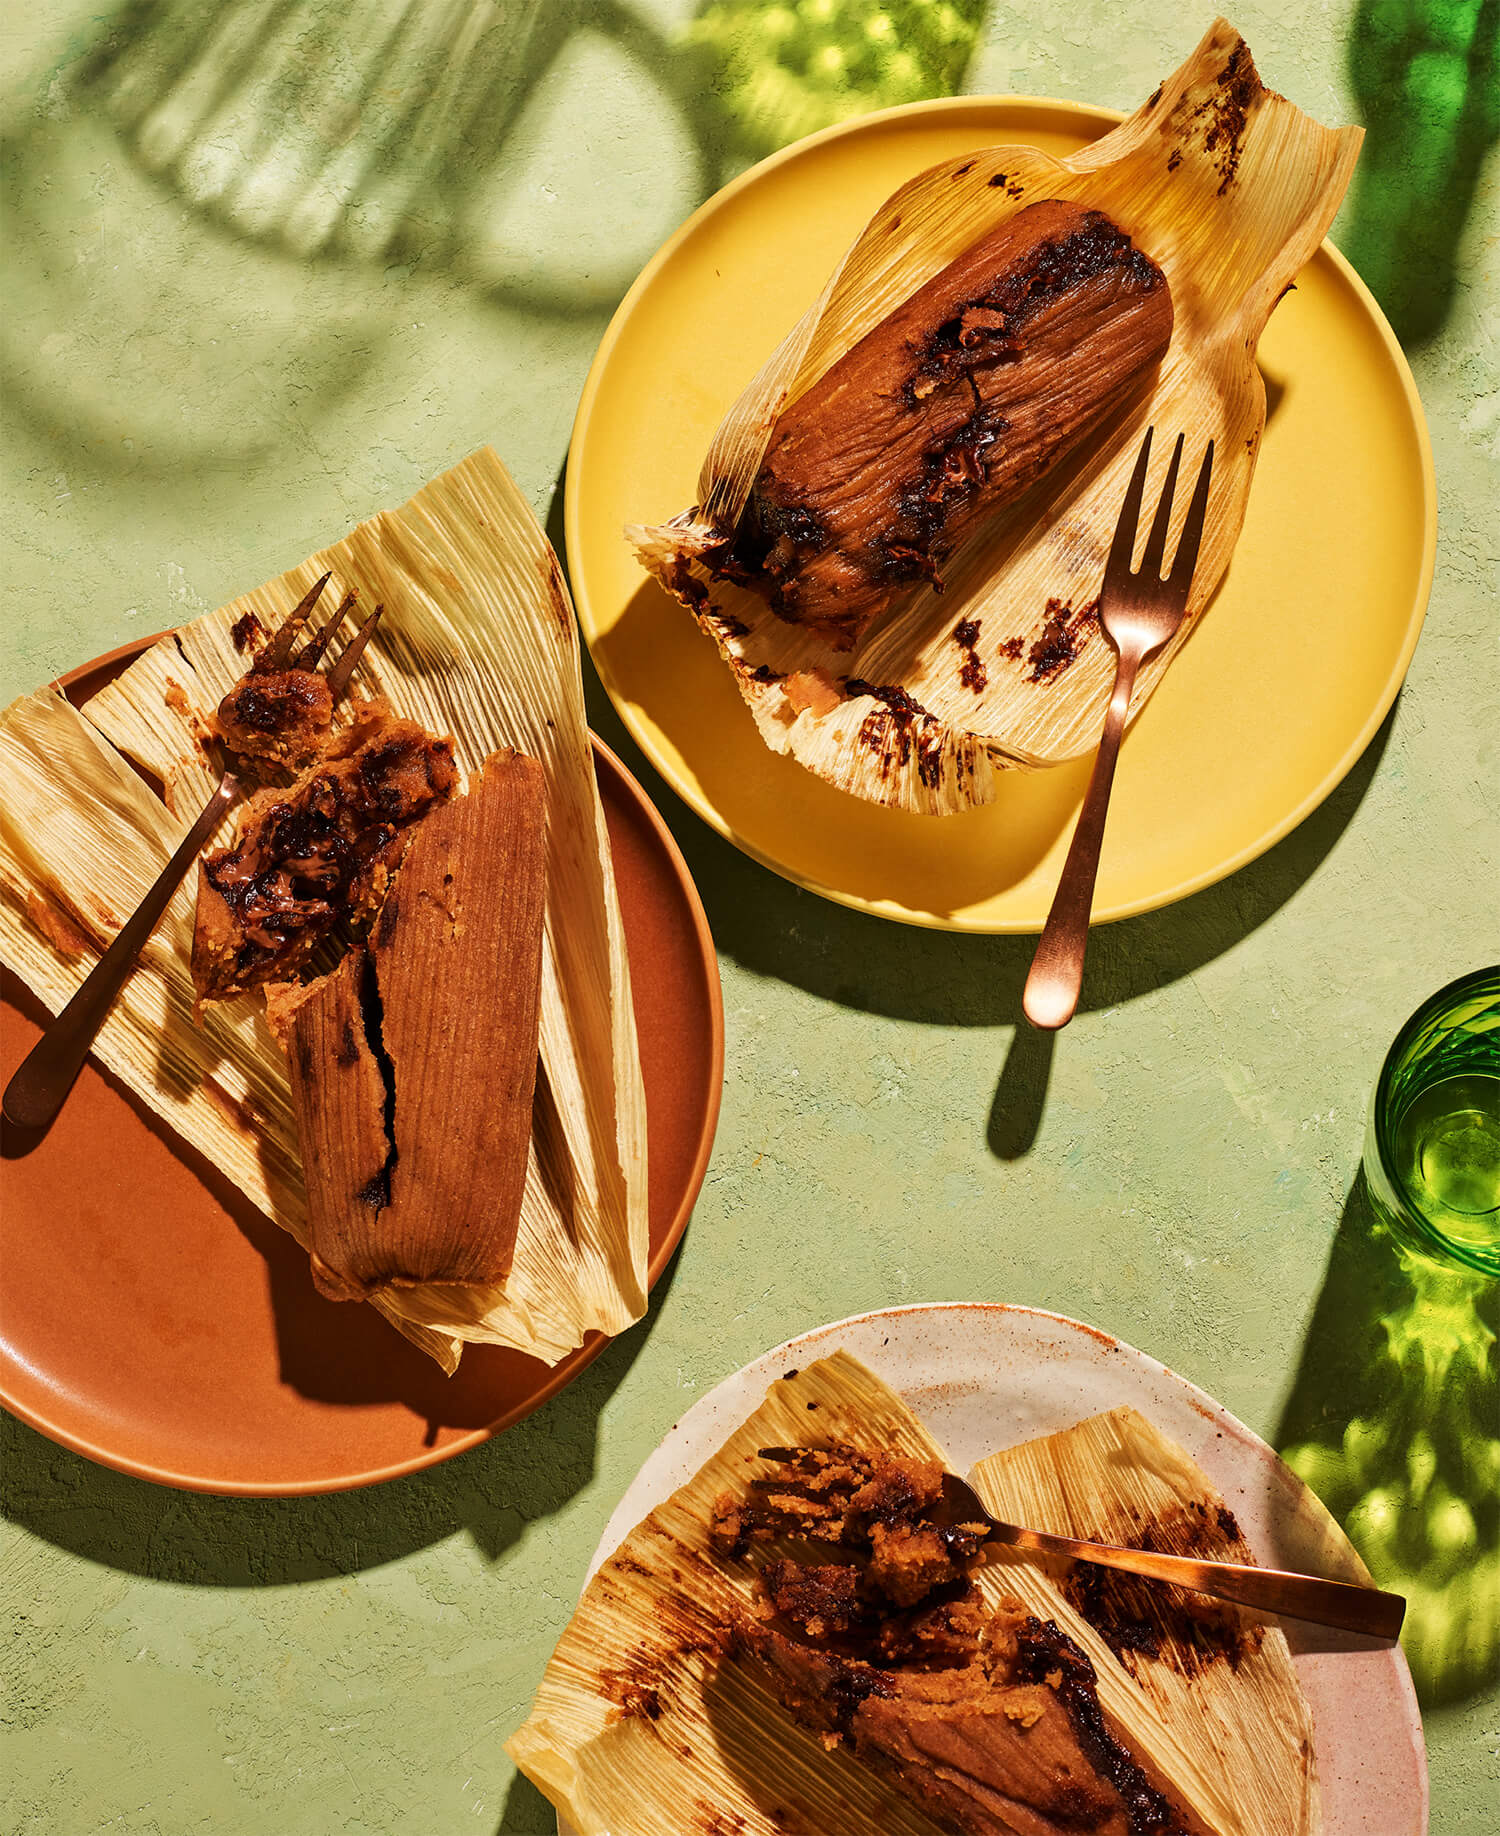 A yellow, brown and pink plate with chocolate tamales on a green table